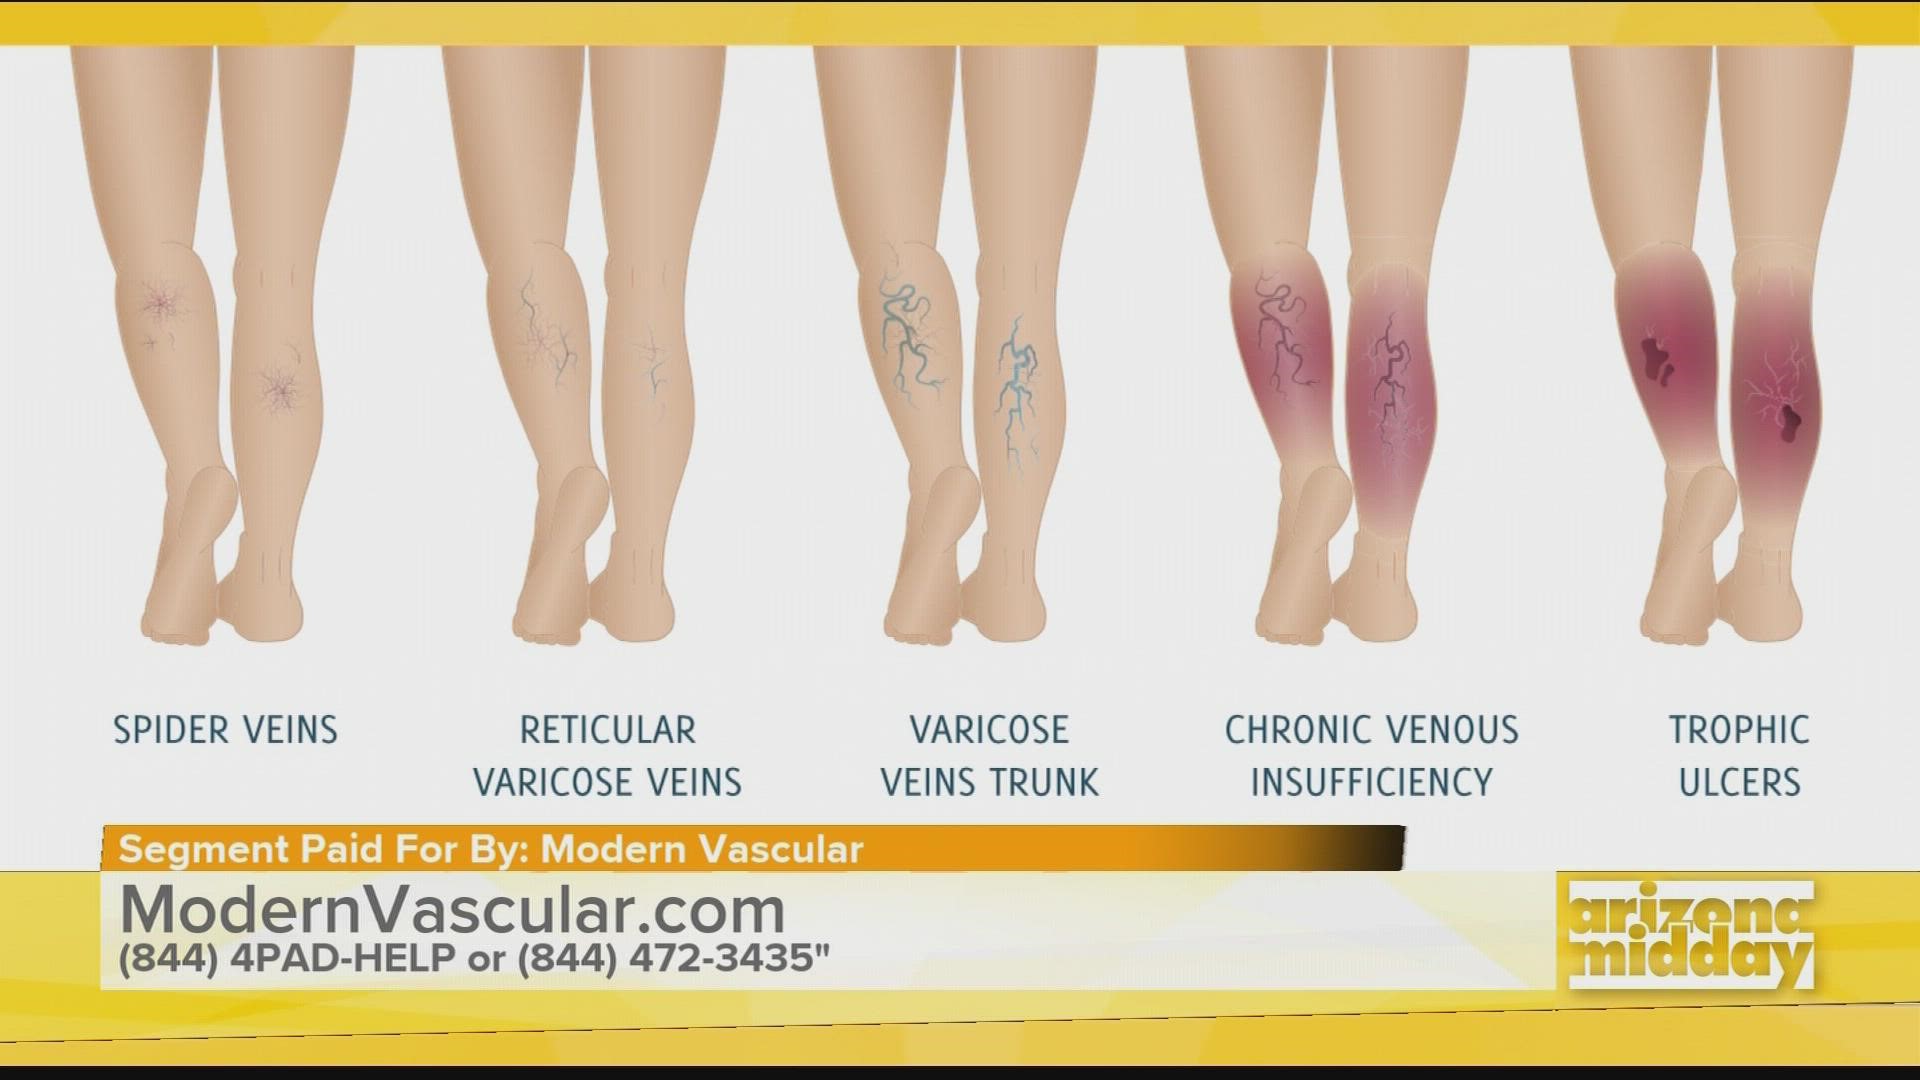 Dr. Scott Brannan with Modern Vascular talks to us about Venous Insufficiency and the treatments to treat the condition - giving you relief.